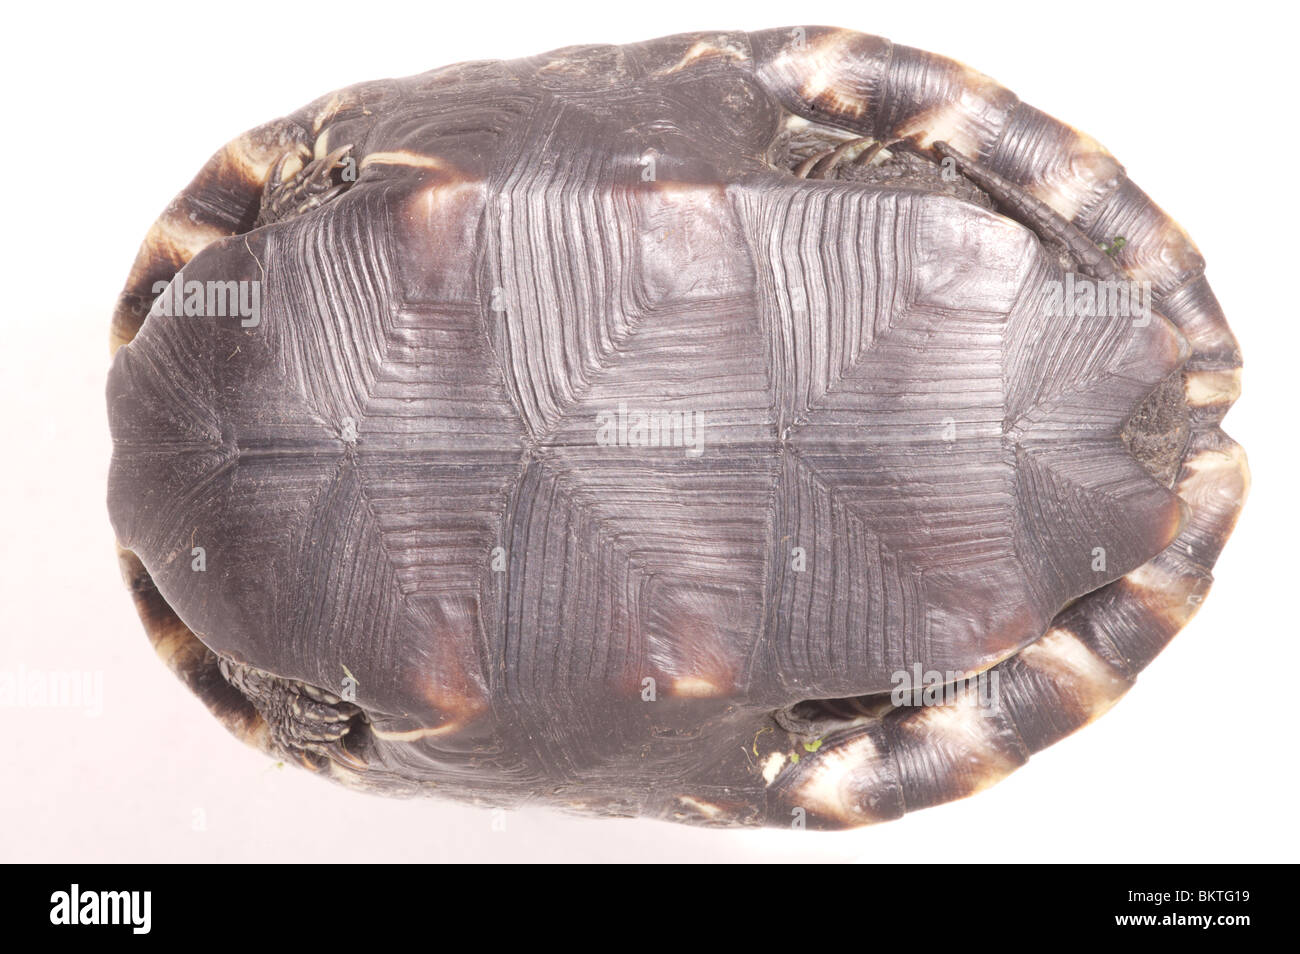 Stripe-necked Terrapin (Mauremys caspica) Ventral view showing growth rings on plastron laminae. Head, Limbs and tail withdrawn. Head end left. Corfu. Greece. Stock Photo